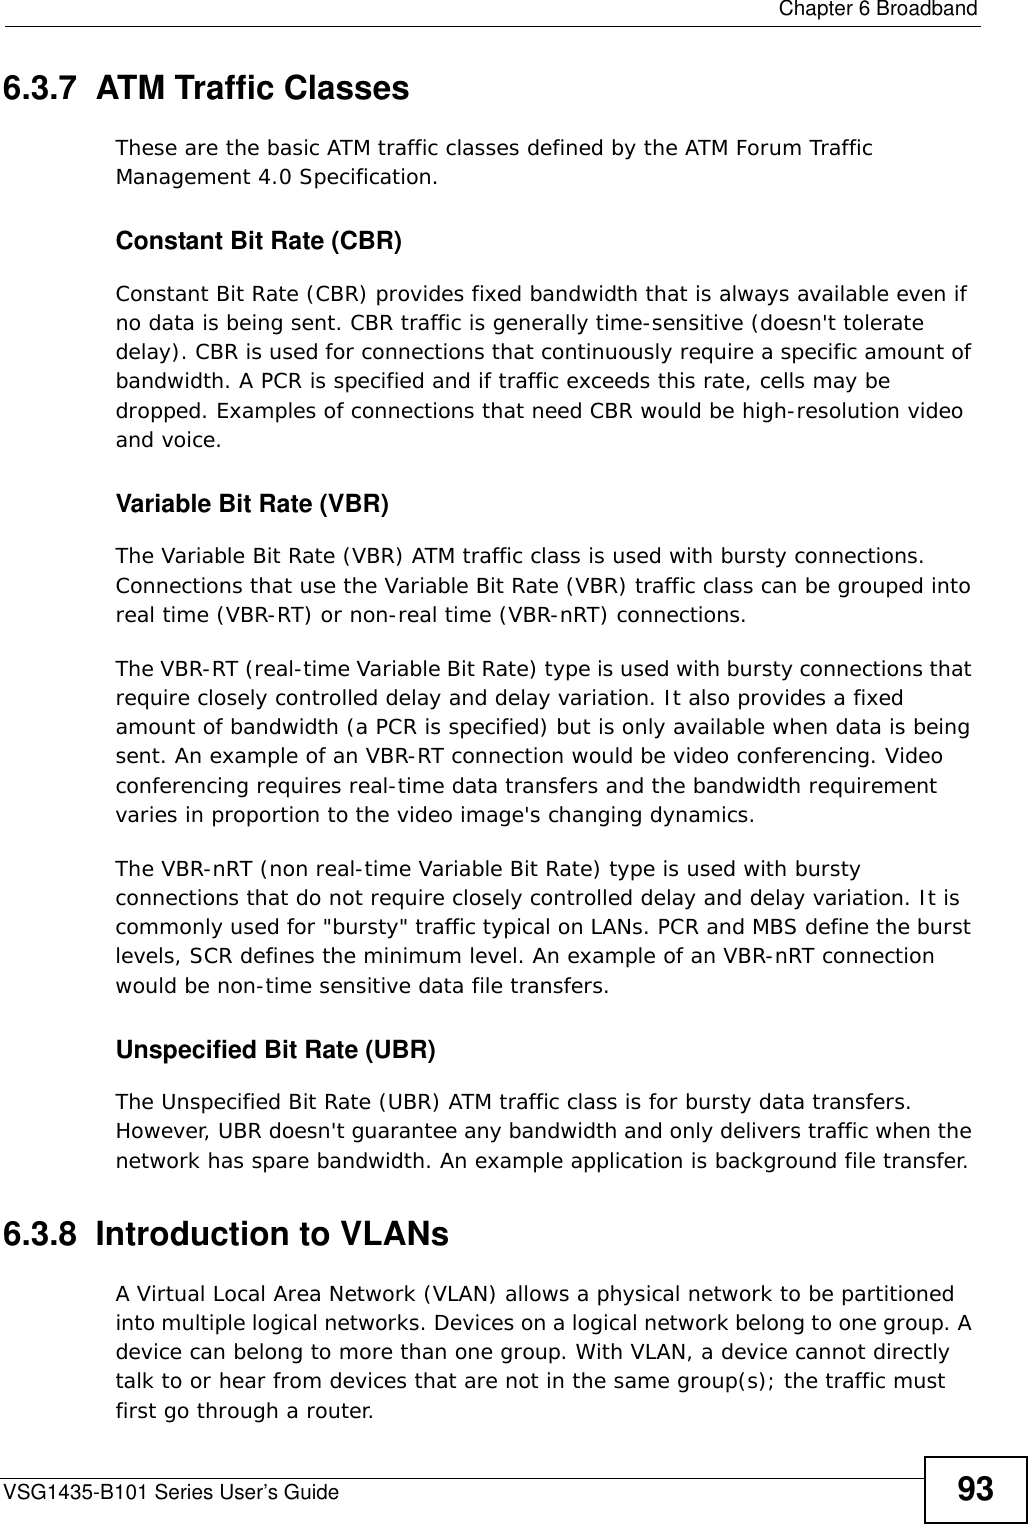  Chapter 6 BroadbandVSG1435-B101 Series User’s Guide 936.3.7  ATM Traffic ClassesThese are the basic ATM traffic classes defined by the ATM Forum Traffic Management 4.0 Specification. Constant Bit Rate (CBR)Constant Bit Rate (CBR) provides fixed bandwidth that is always available even if no data is being sent. CBR traffic is generally time-sensitive (doesn&apos;t tolerate delay). CBR is used for connections that continuously require a specific amount of bandwidth. A PCR is specified and if traffic exceeds this rate, cells may be dropped. Examples of connections that need CBR would be high-resolution video and voice.Variable Bit Rate (VBR) The Variable Bit Rate (VBR) ATM traffic class is used with bursty connections. Connections that use the Variable Bit Rate (VBR) traffic class can be grouped into real time (VBR-RT) or non-real time (VBR-nRT) connections. The VBR-RT (real-time Variable Bit Rate) type is used with bursty connections that require closely controlled delay and delay variation. It also provides a fixed amount of bandwidth (a PCR is specified) but is only available when data is being sent. An example of an VBR-RT connection would be video conferencing. Video conferencing requires real-time data transfers and the bandwidth requirement varies in proportion to the video image&apos;s changing dynamics. The VBR-nRT (non real-time Variable Bit Rate) type is used with bursty connections that do not require closely controlled delay and delay variation. It is commonly used for &quot;bursty&quot; traffic typical on LANs. PCR and MBS define the burst levels, SCR defines the minimum level. An example of an VBR-nRT connection would be non-time sensitive data file transfers.Unspecified Bit Rate (UBR)The Unspecified Bit Rate (UBR) ATM traffic class is for bursty data transfers. However, UBR doesn&apos;t guarantee any bandwidth and only delivers traffic when the network has spare bandwidth. An example application is background file transfer.6.3.8  Introduction to VLANs A Virtual Local Area Network (VLAN) allows a physical network to be partitioned into multiple logical networks. Devices on a logical network belong to one group. A device can belong to more than one group. With VLAN, a device cannot directly talk to or hear from devices that are not in the same group(s); the traffic must first go through a router.